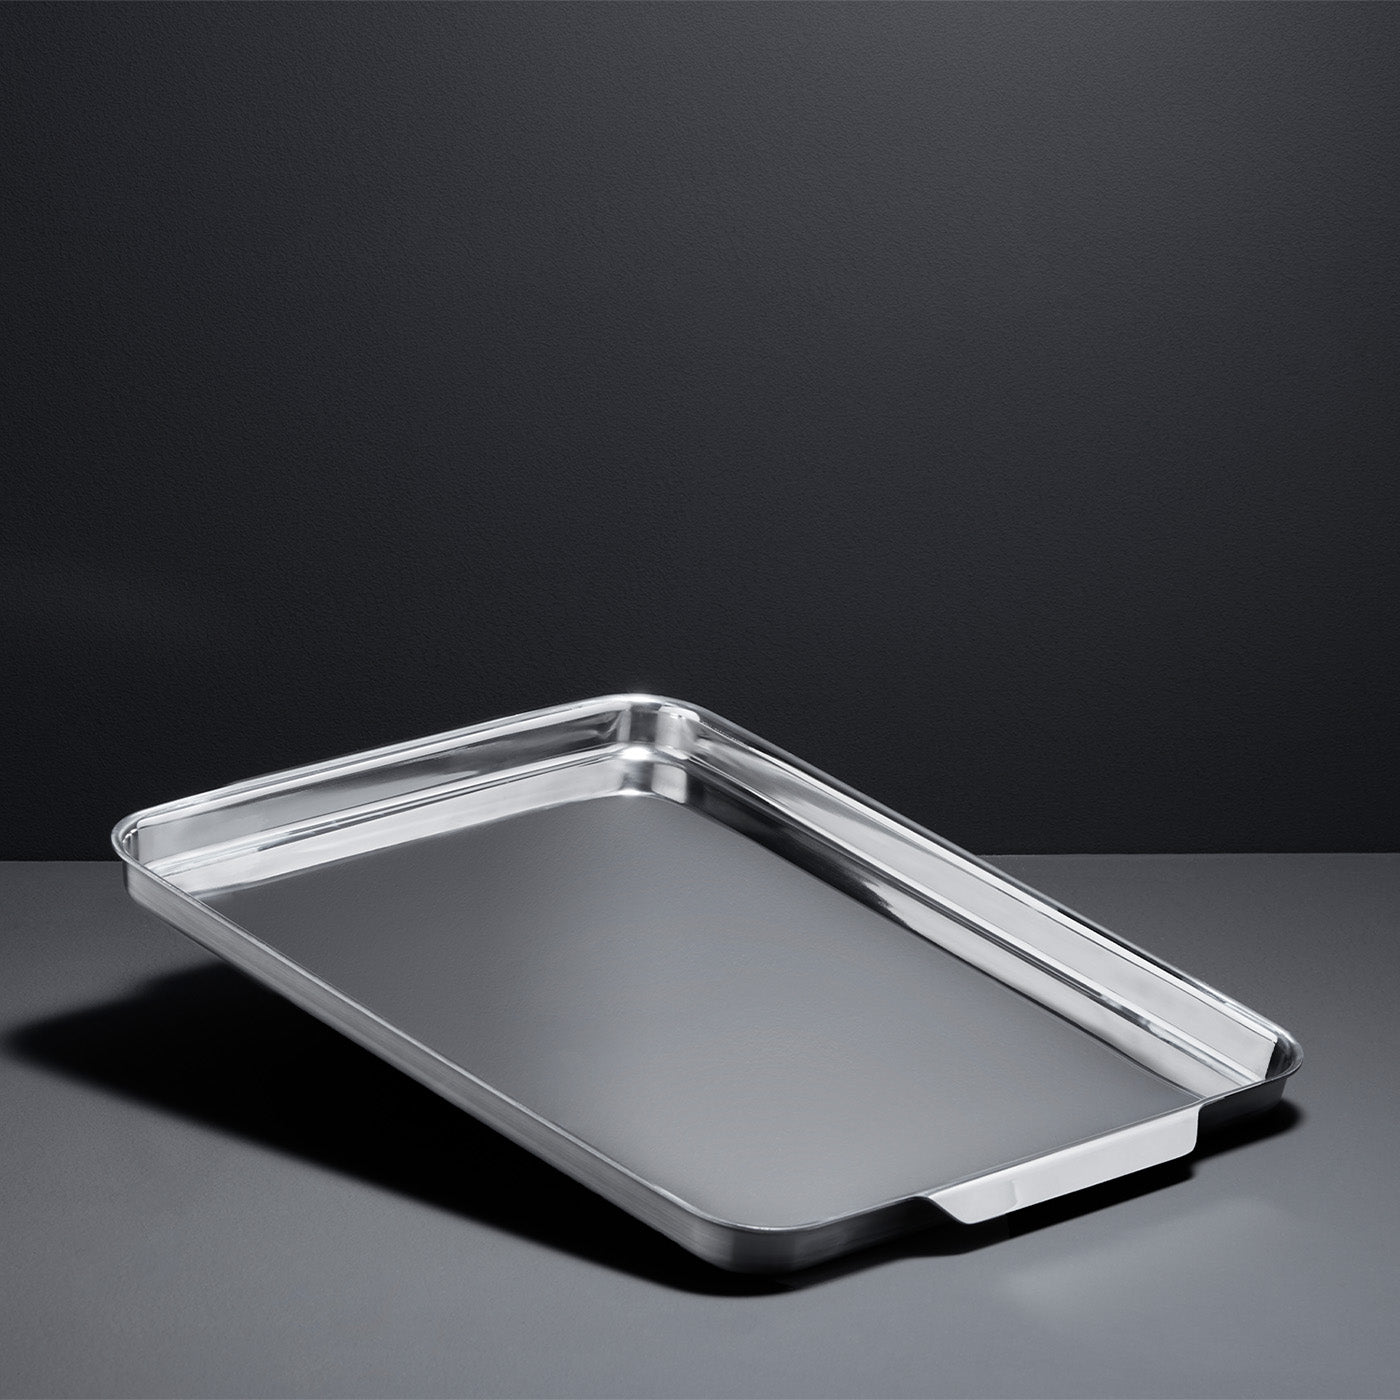 Made In Cookware Half Sheet Pan Bakeware Review - Consumer Reports